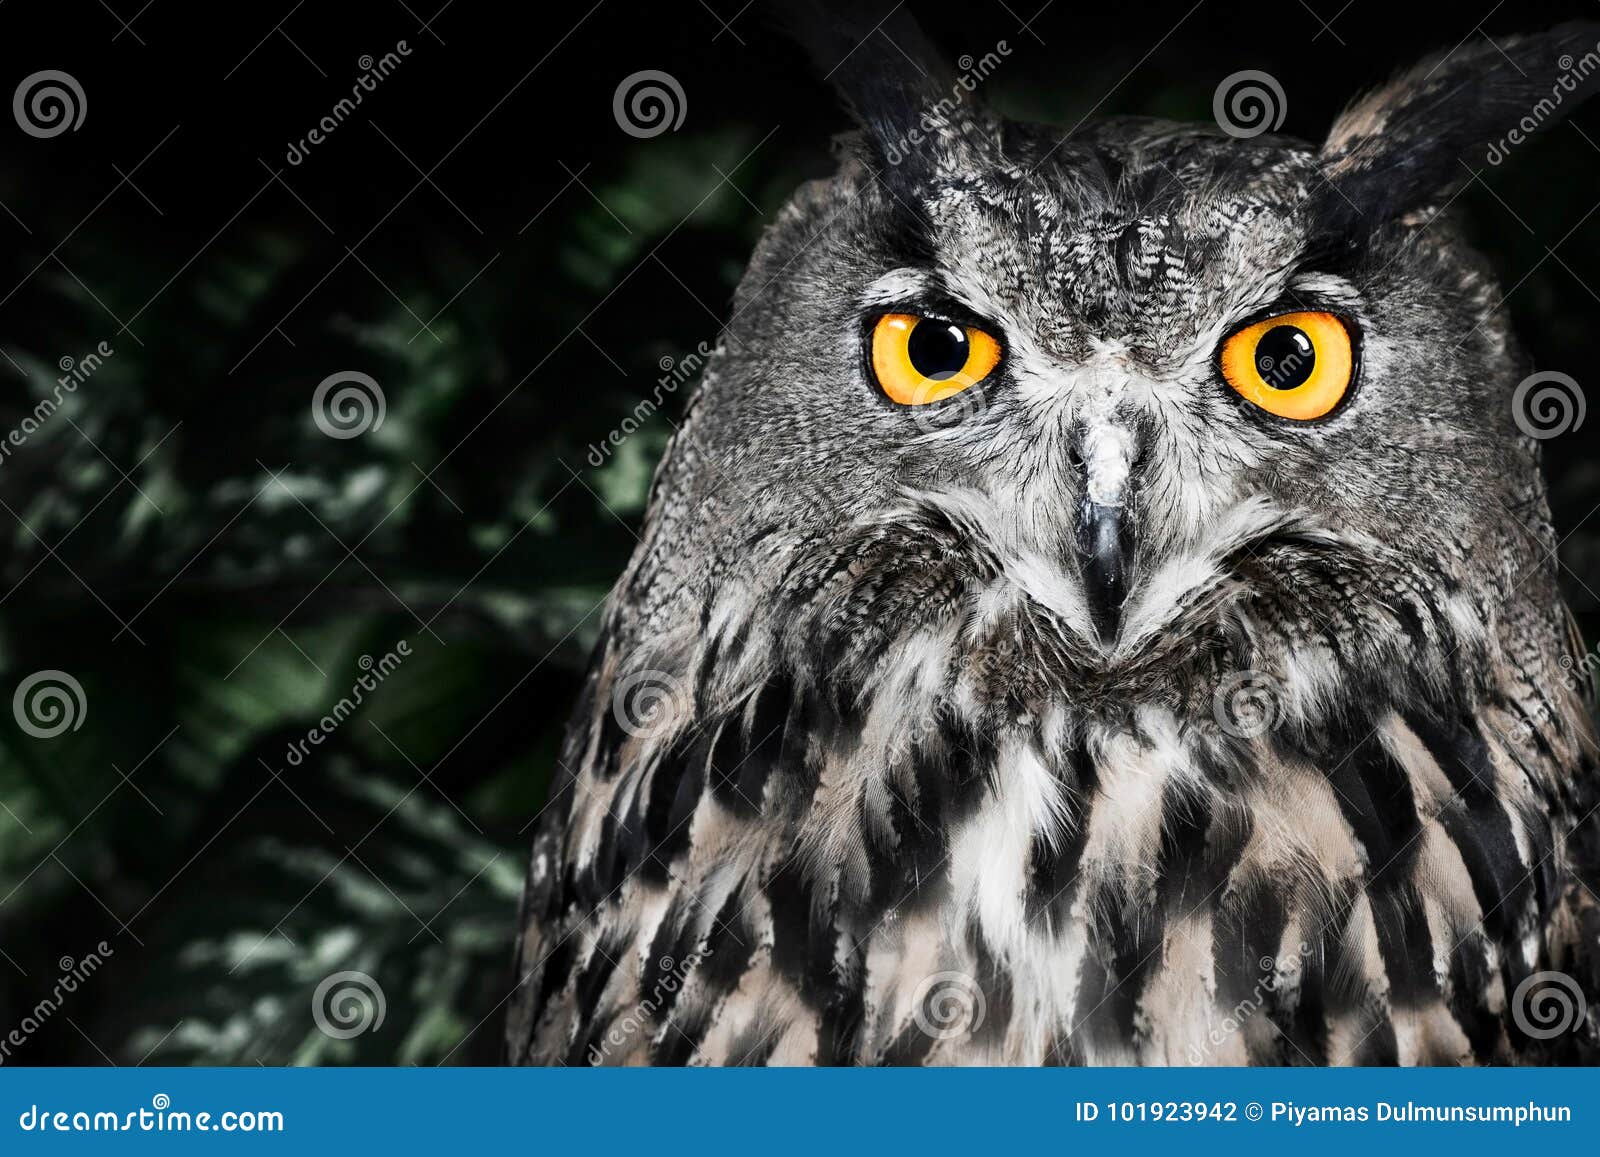 The Eagle Owl Of Evil Is Huge And Looks At You Snapping His Beak. Owl ...